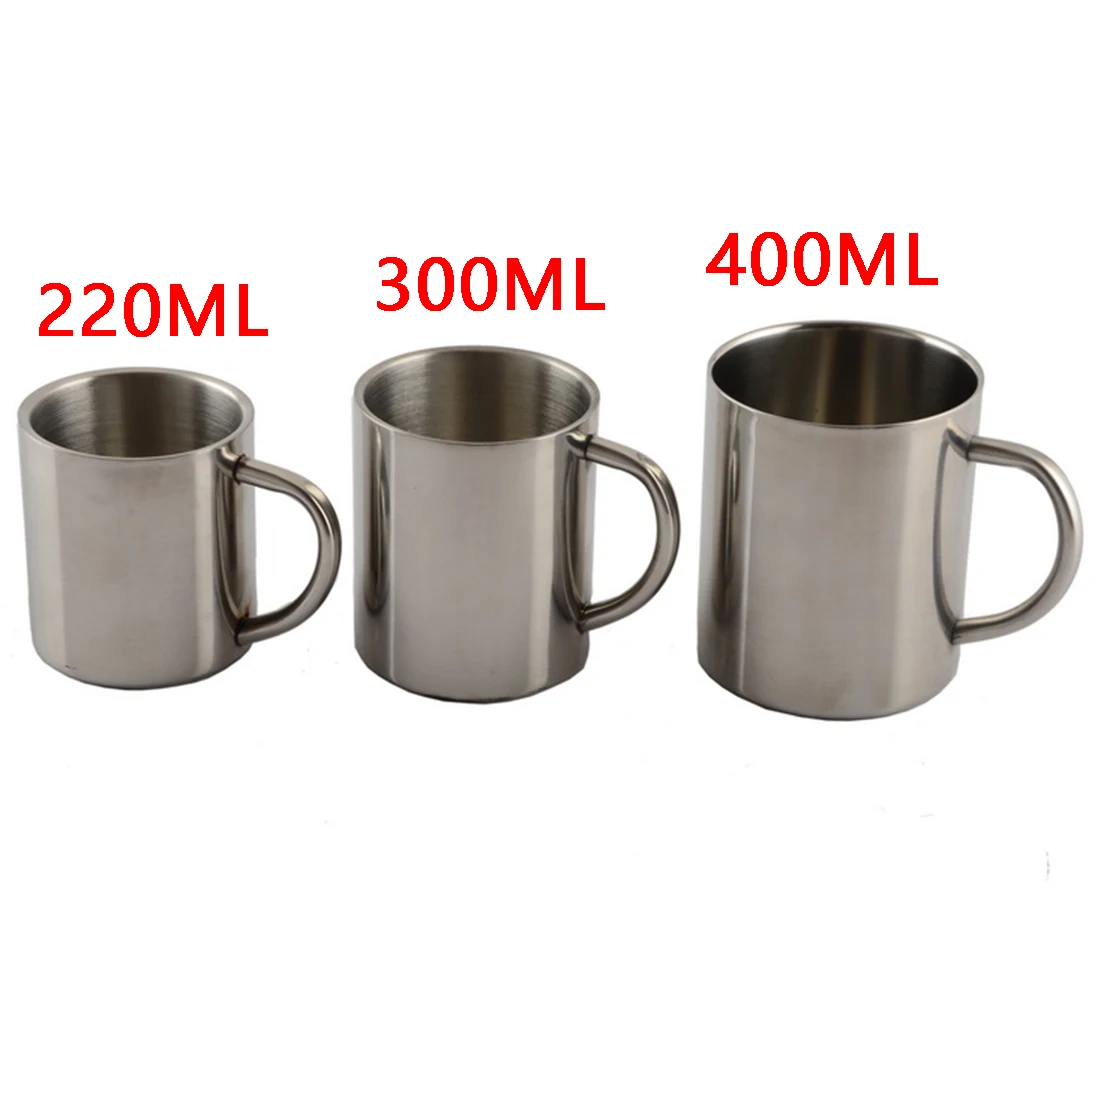 1PC Double Wall Polished Stainless Steel COFFEE CUP Beverage Hot Tea Mug Cup xxf 